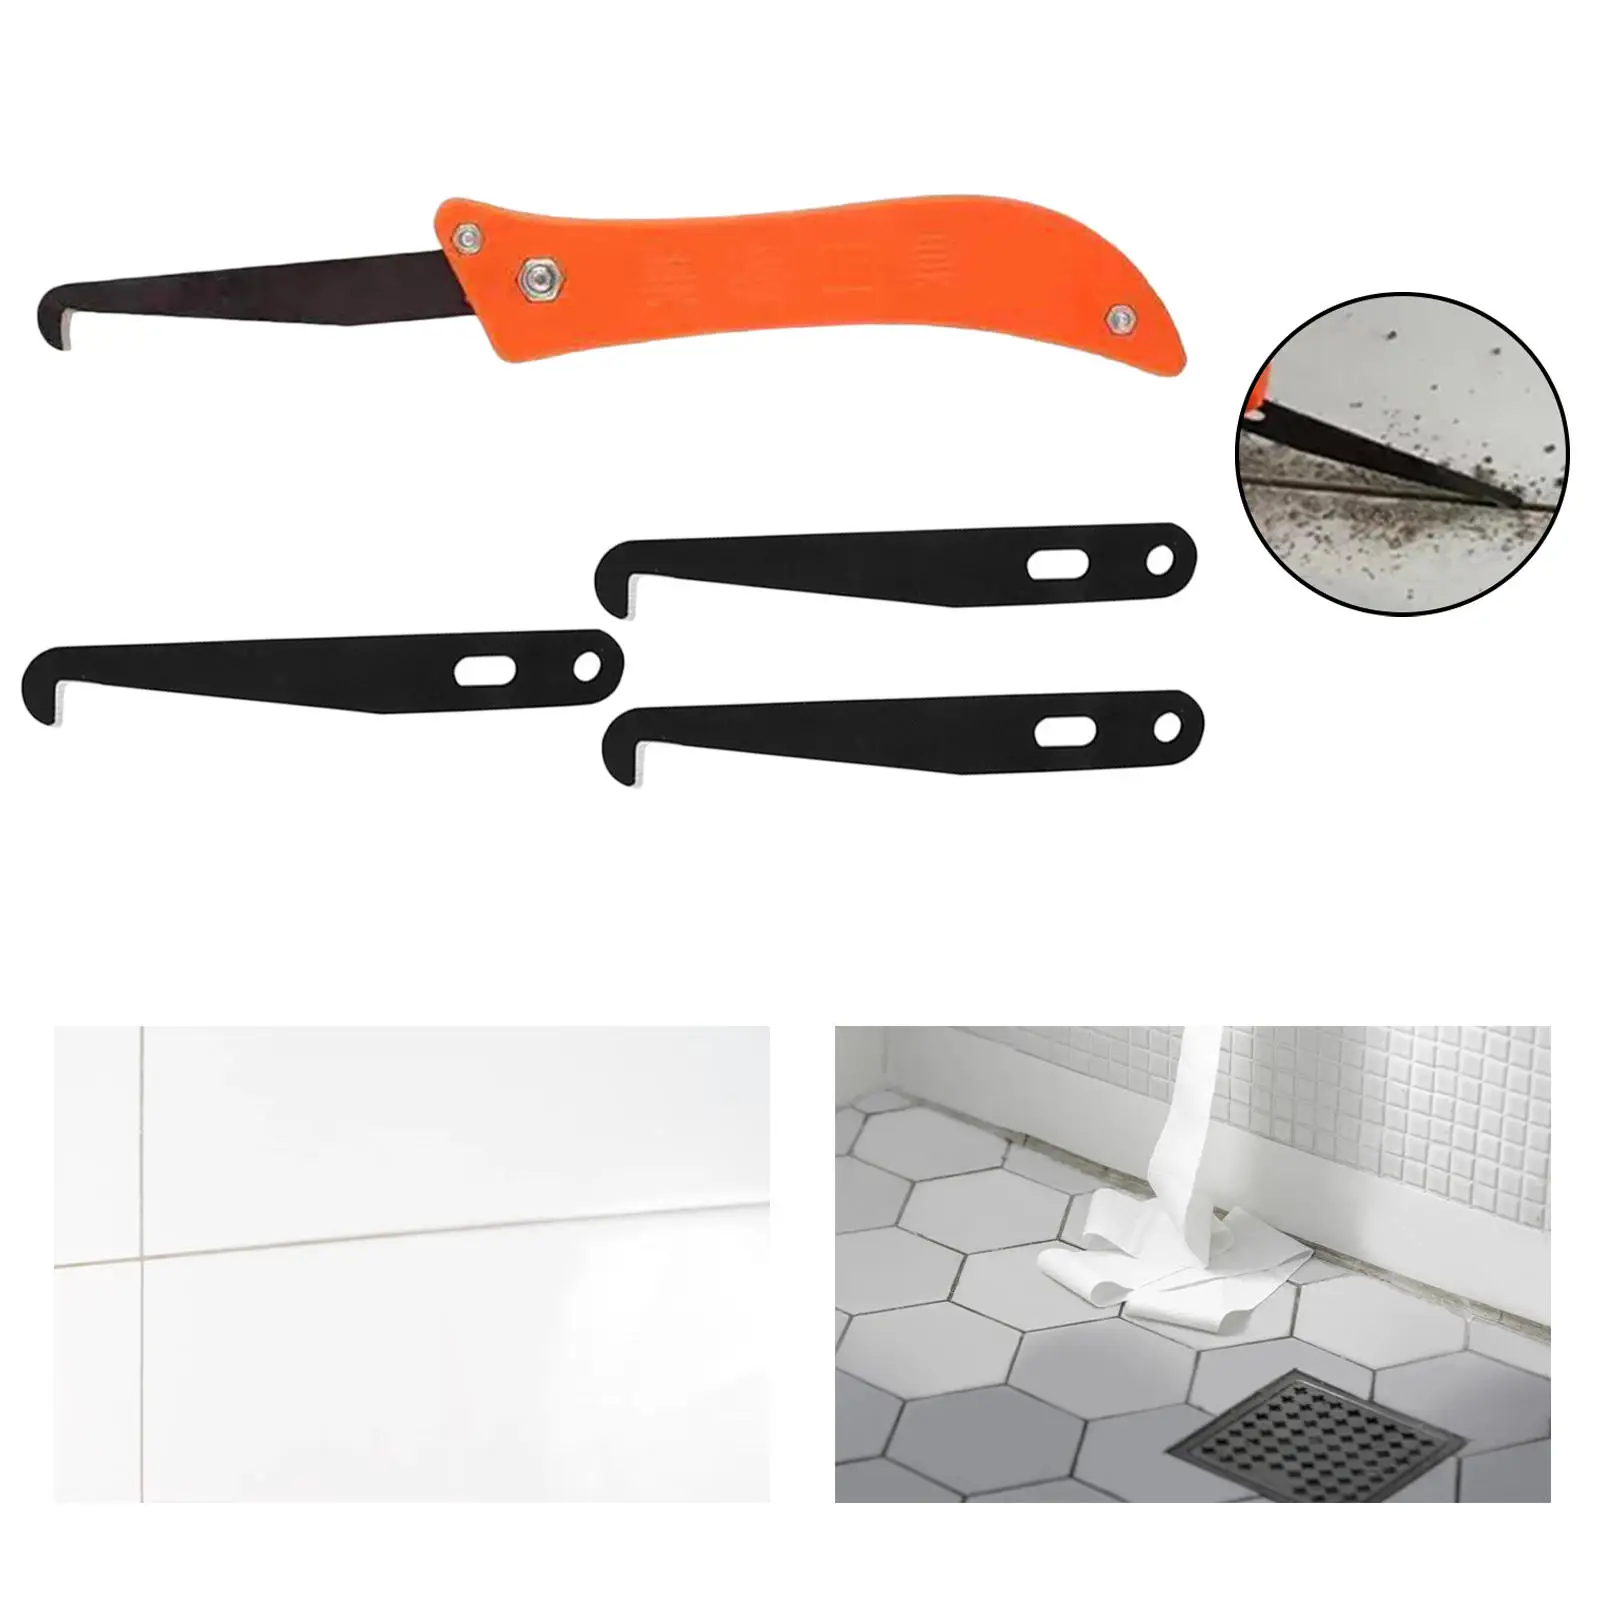 Tile Gap Repair Tool Hook Knife Professional Cleaning and Removal of Old Grout Hand Tools Alloy Steel Joint Notcher Collator